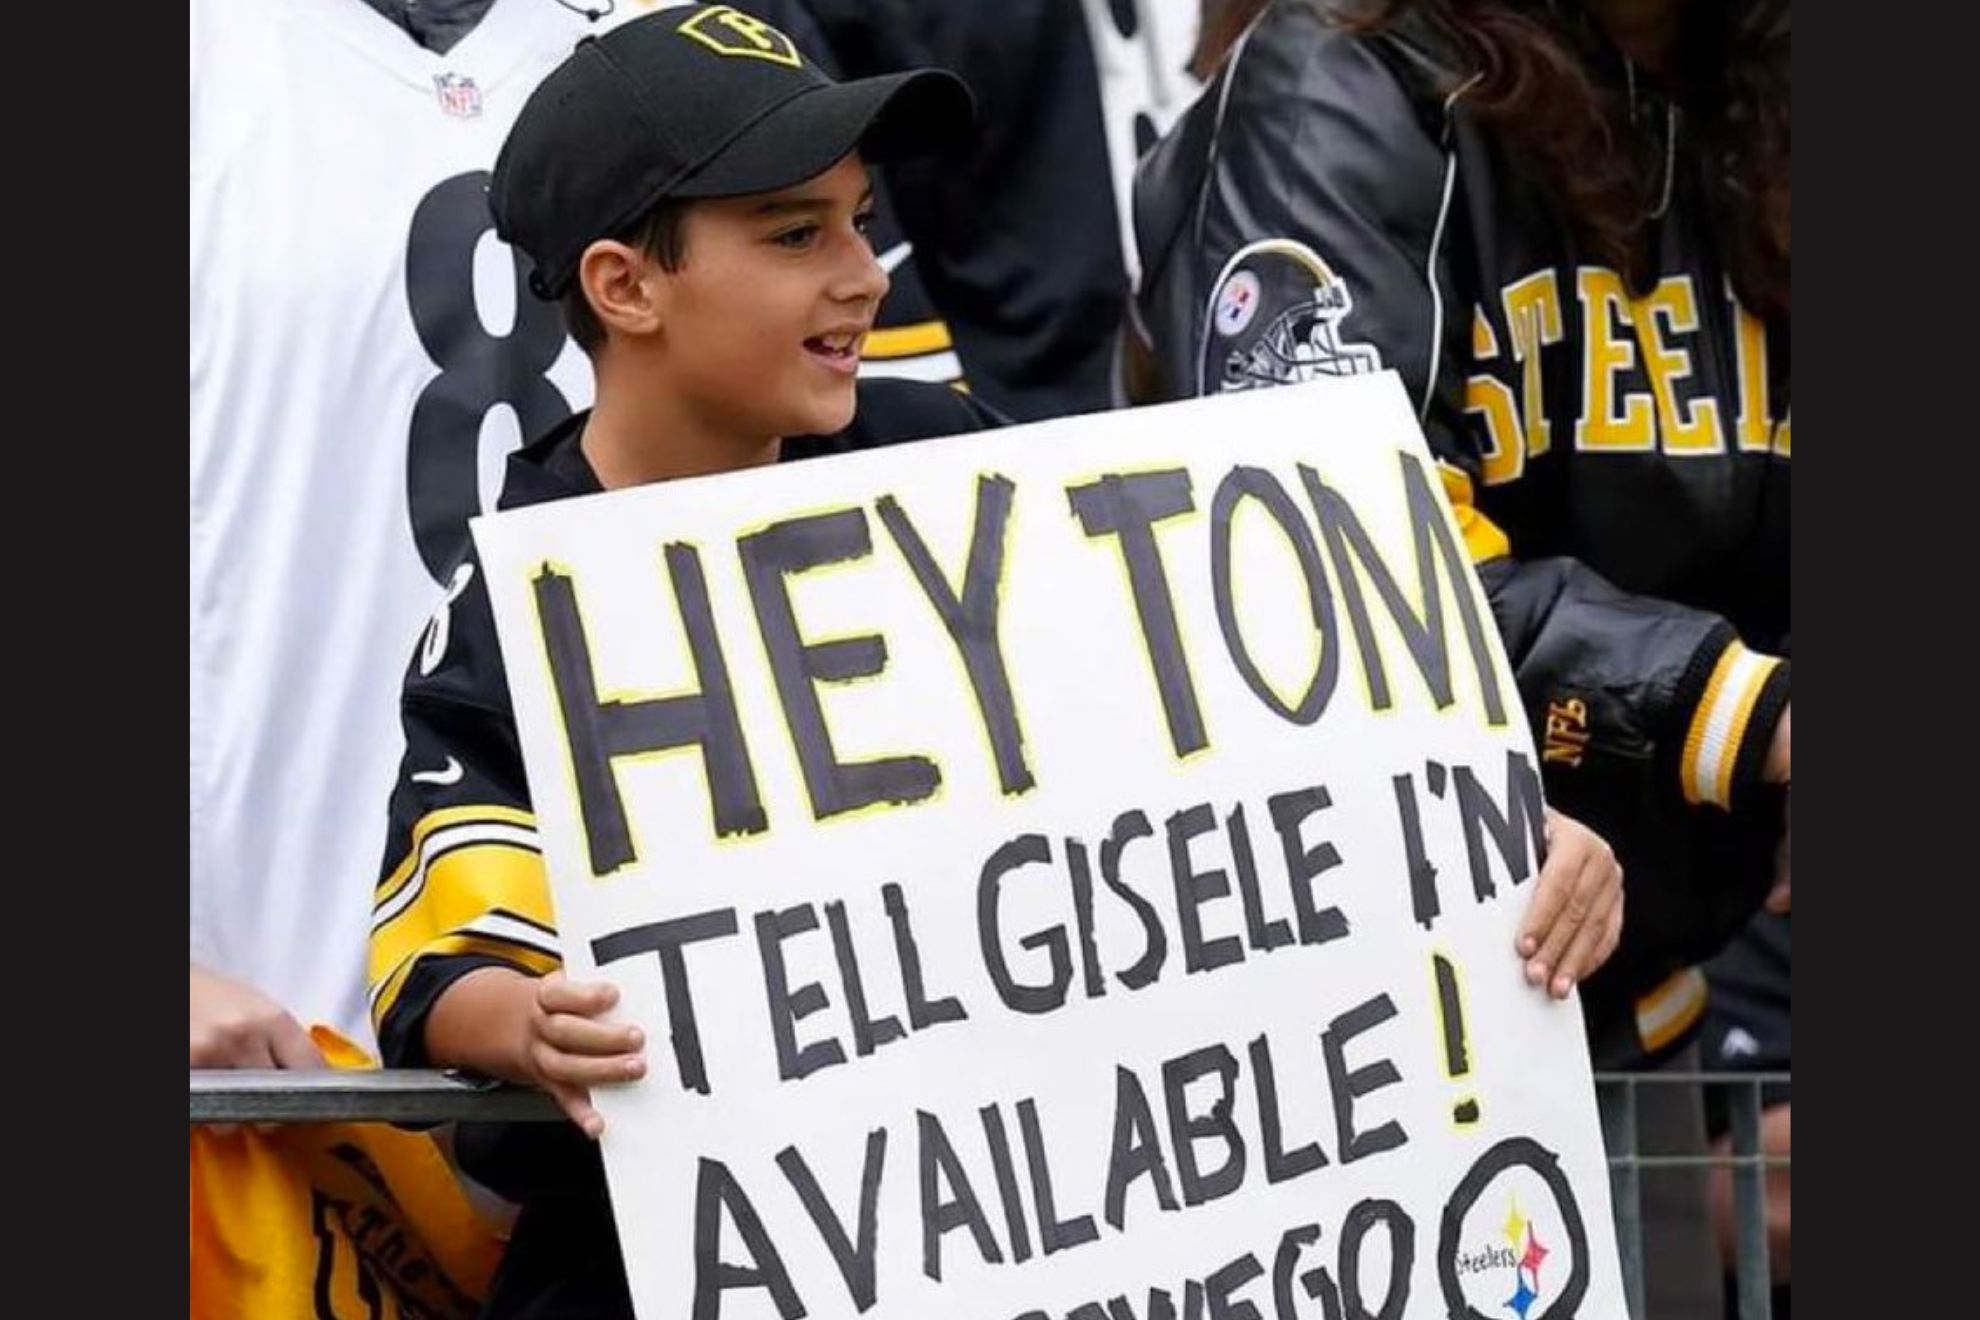 Child at Bucs vs Steelers game holds sign saying "Hey Tom, tell Gisele I'm available!" -S.G.